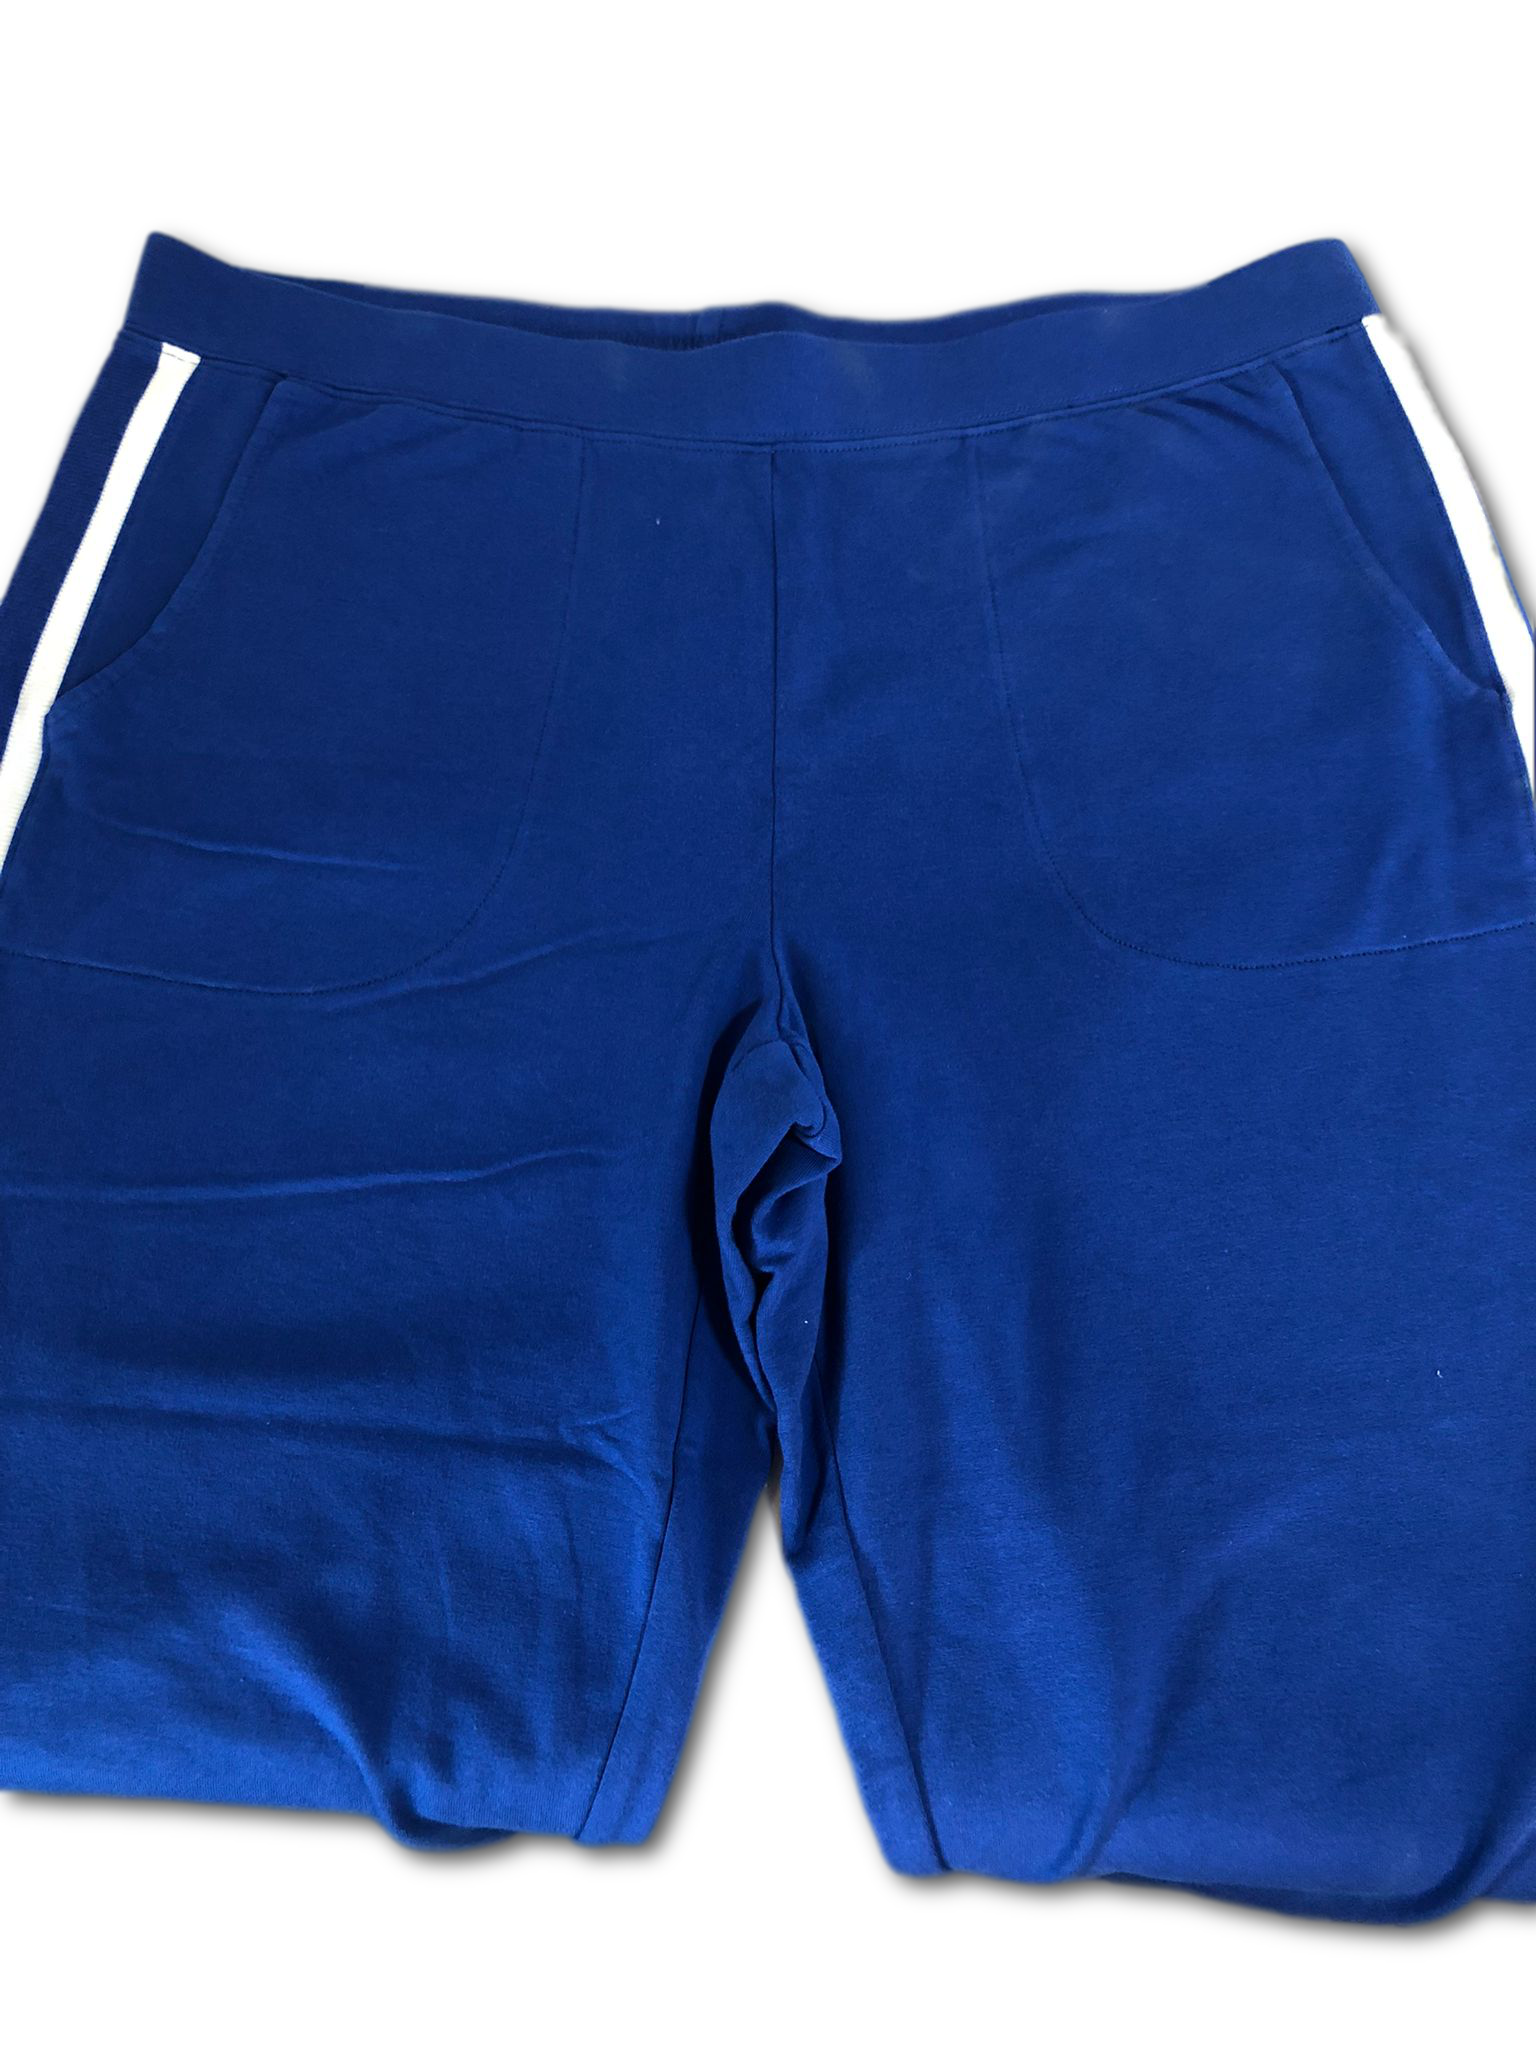 Denim & Co. Active Crop Pants with Striped Rib Side Panel, Blue L